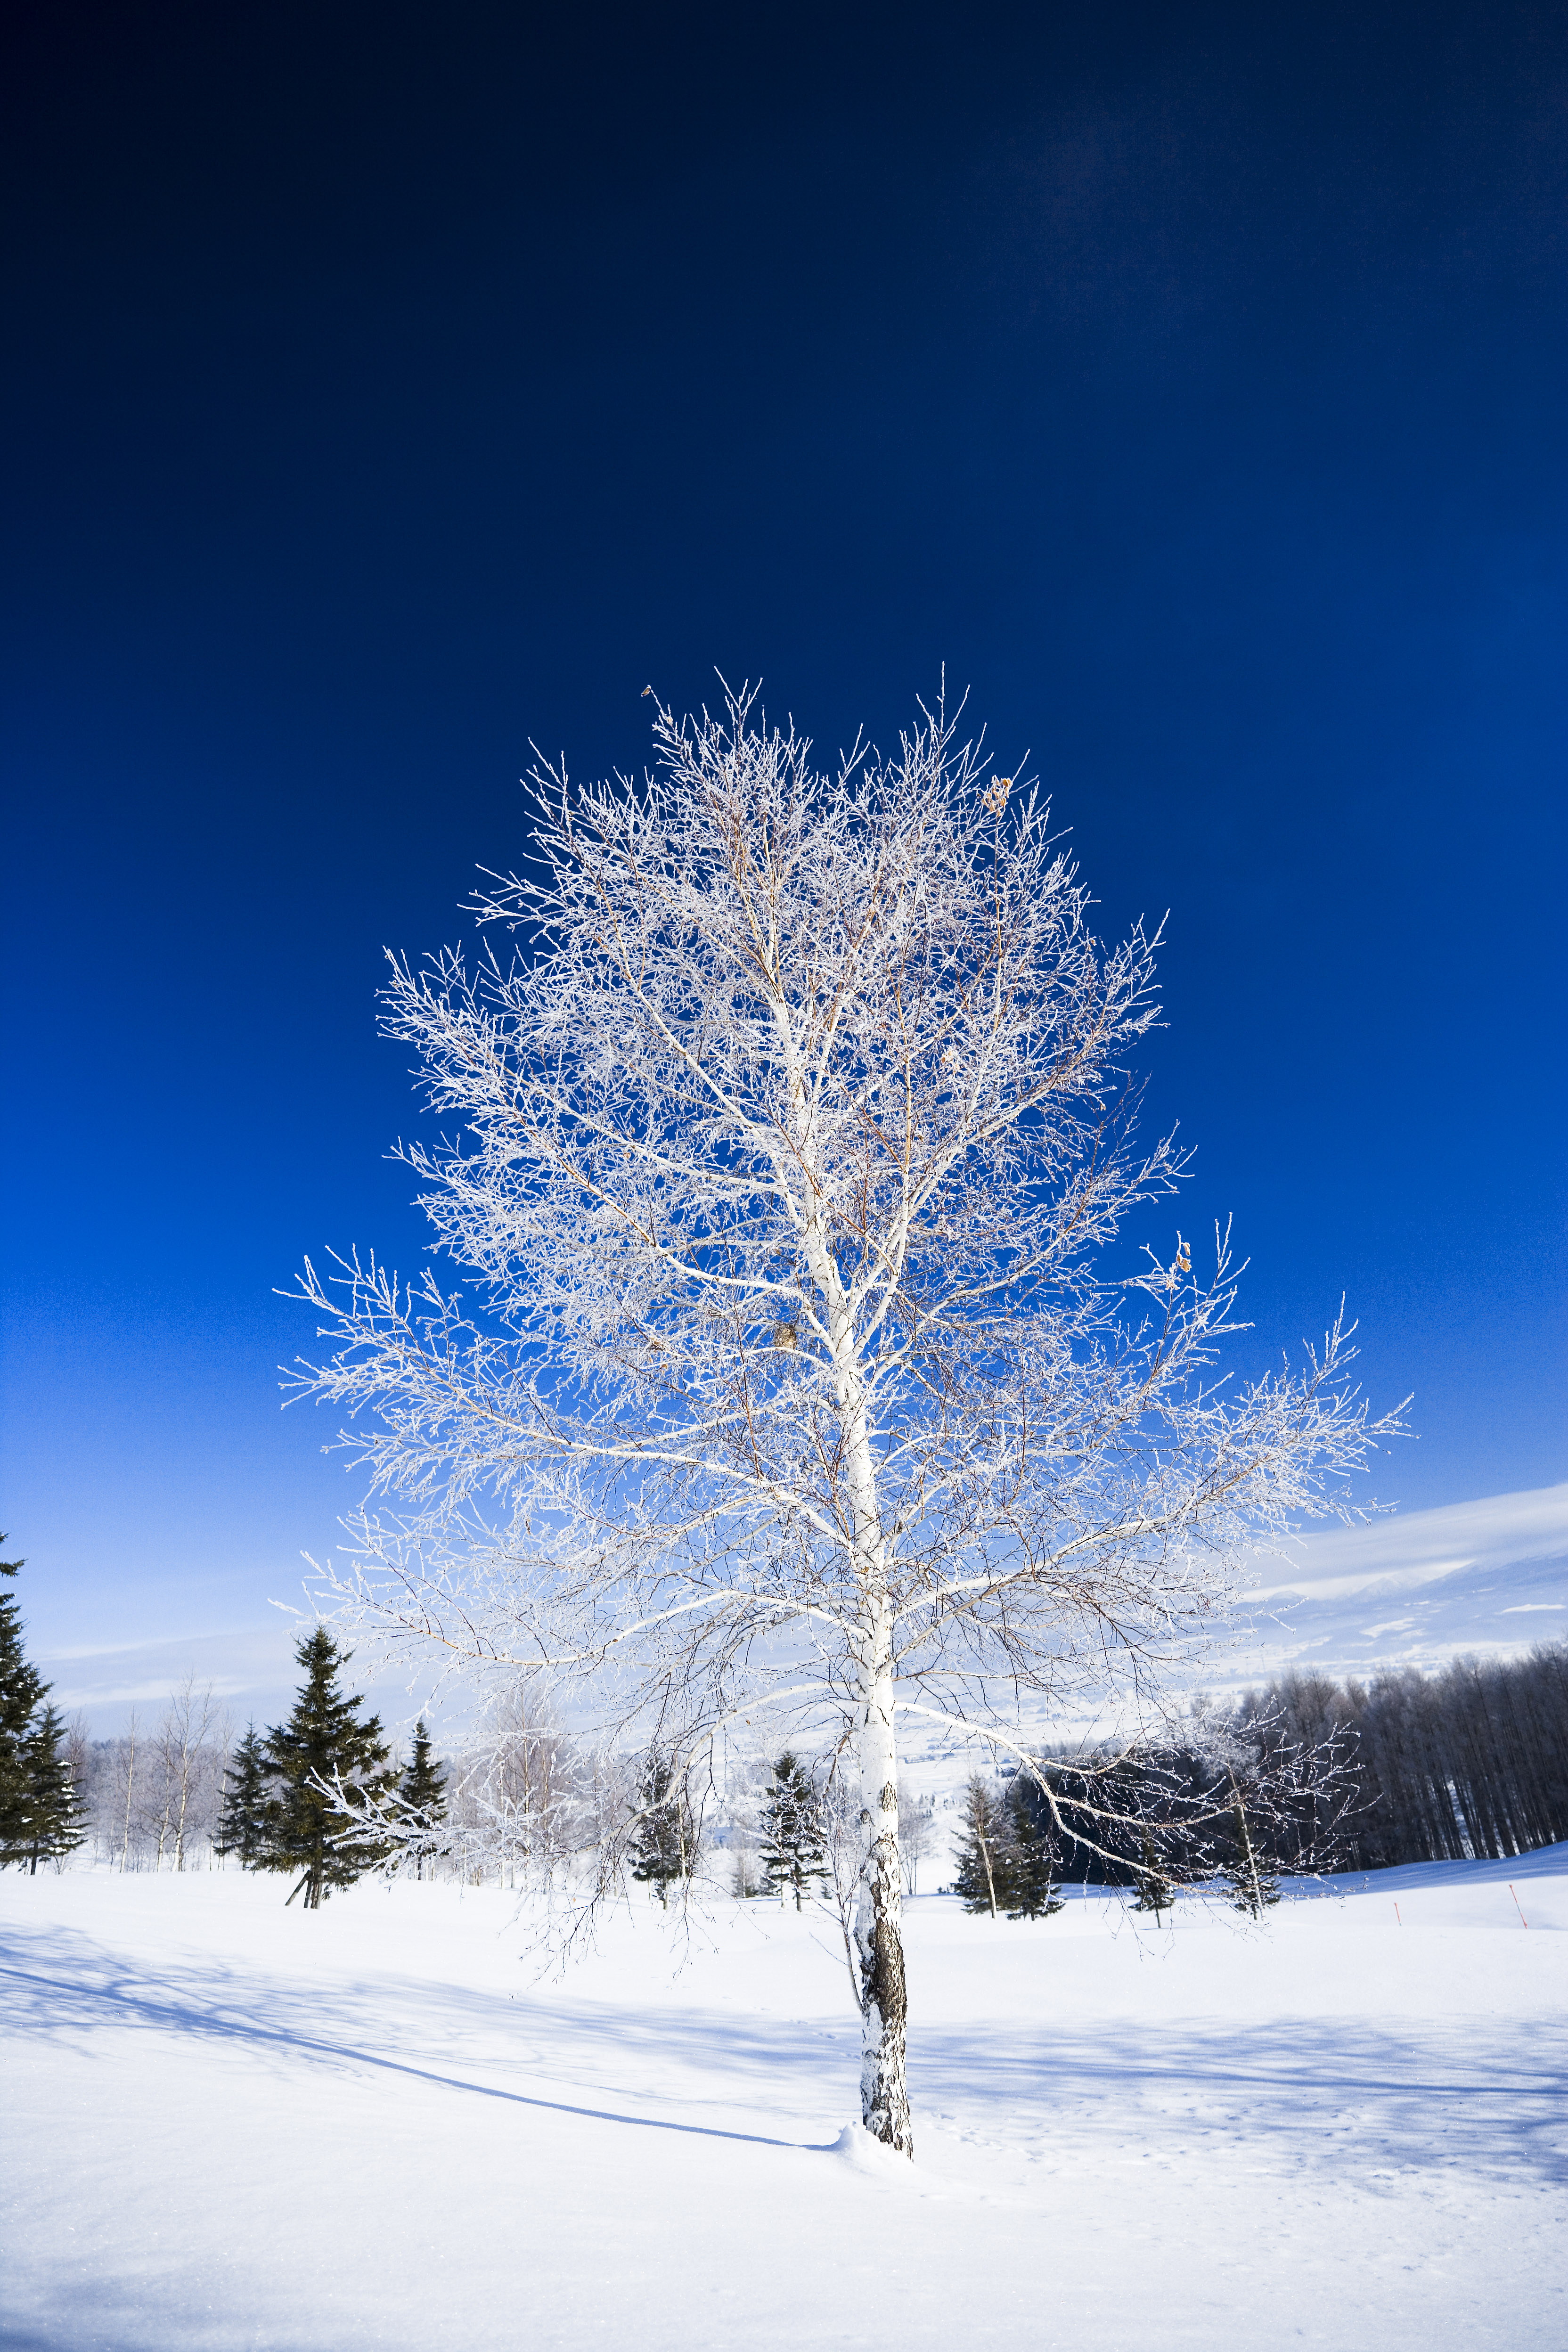 photo,material,free,landscape,picture,stock photo,Creative Commons,The rime on trees and a blue sky, blue sky, The rime on trees, snowy field, white birch